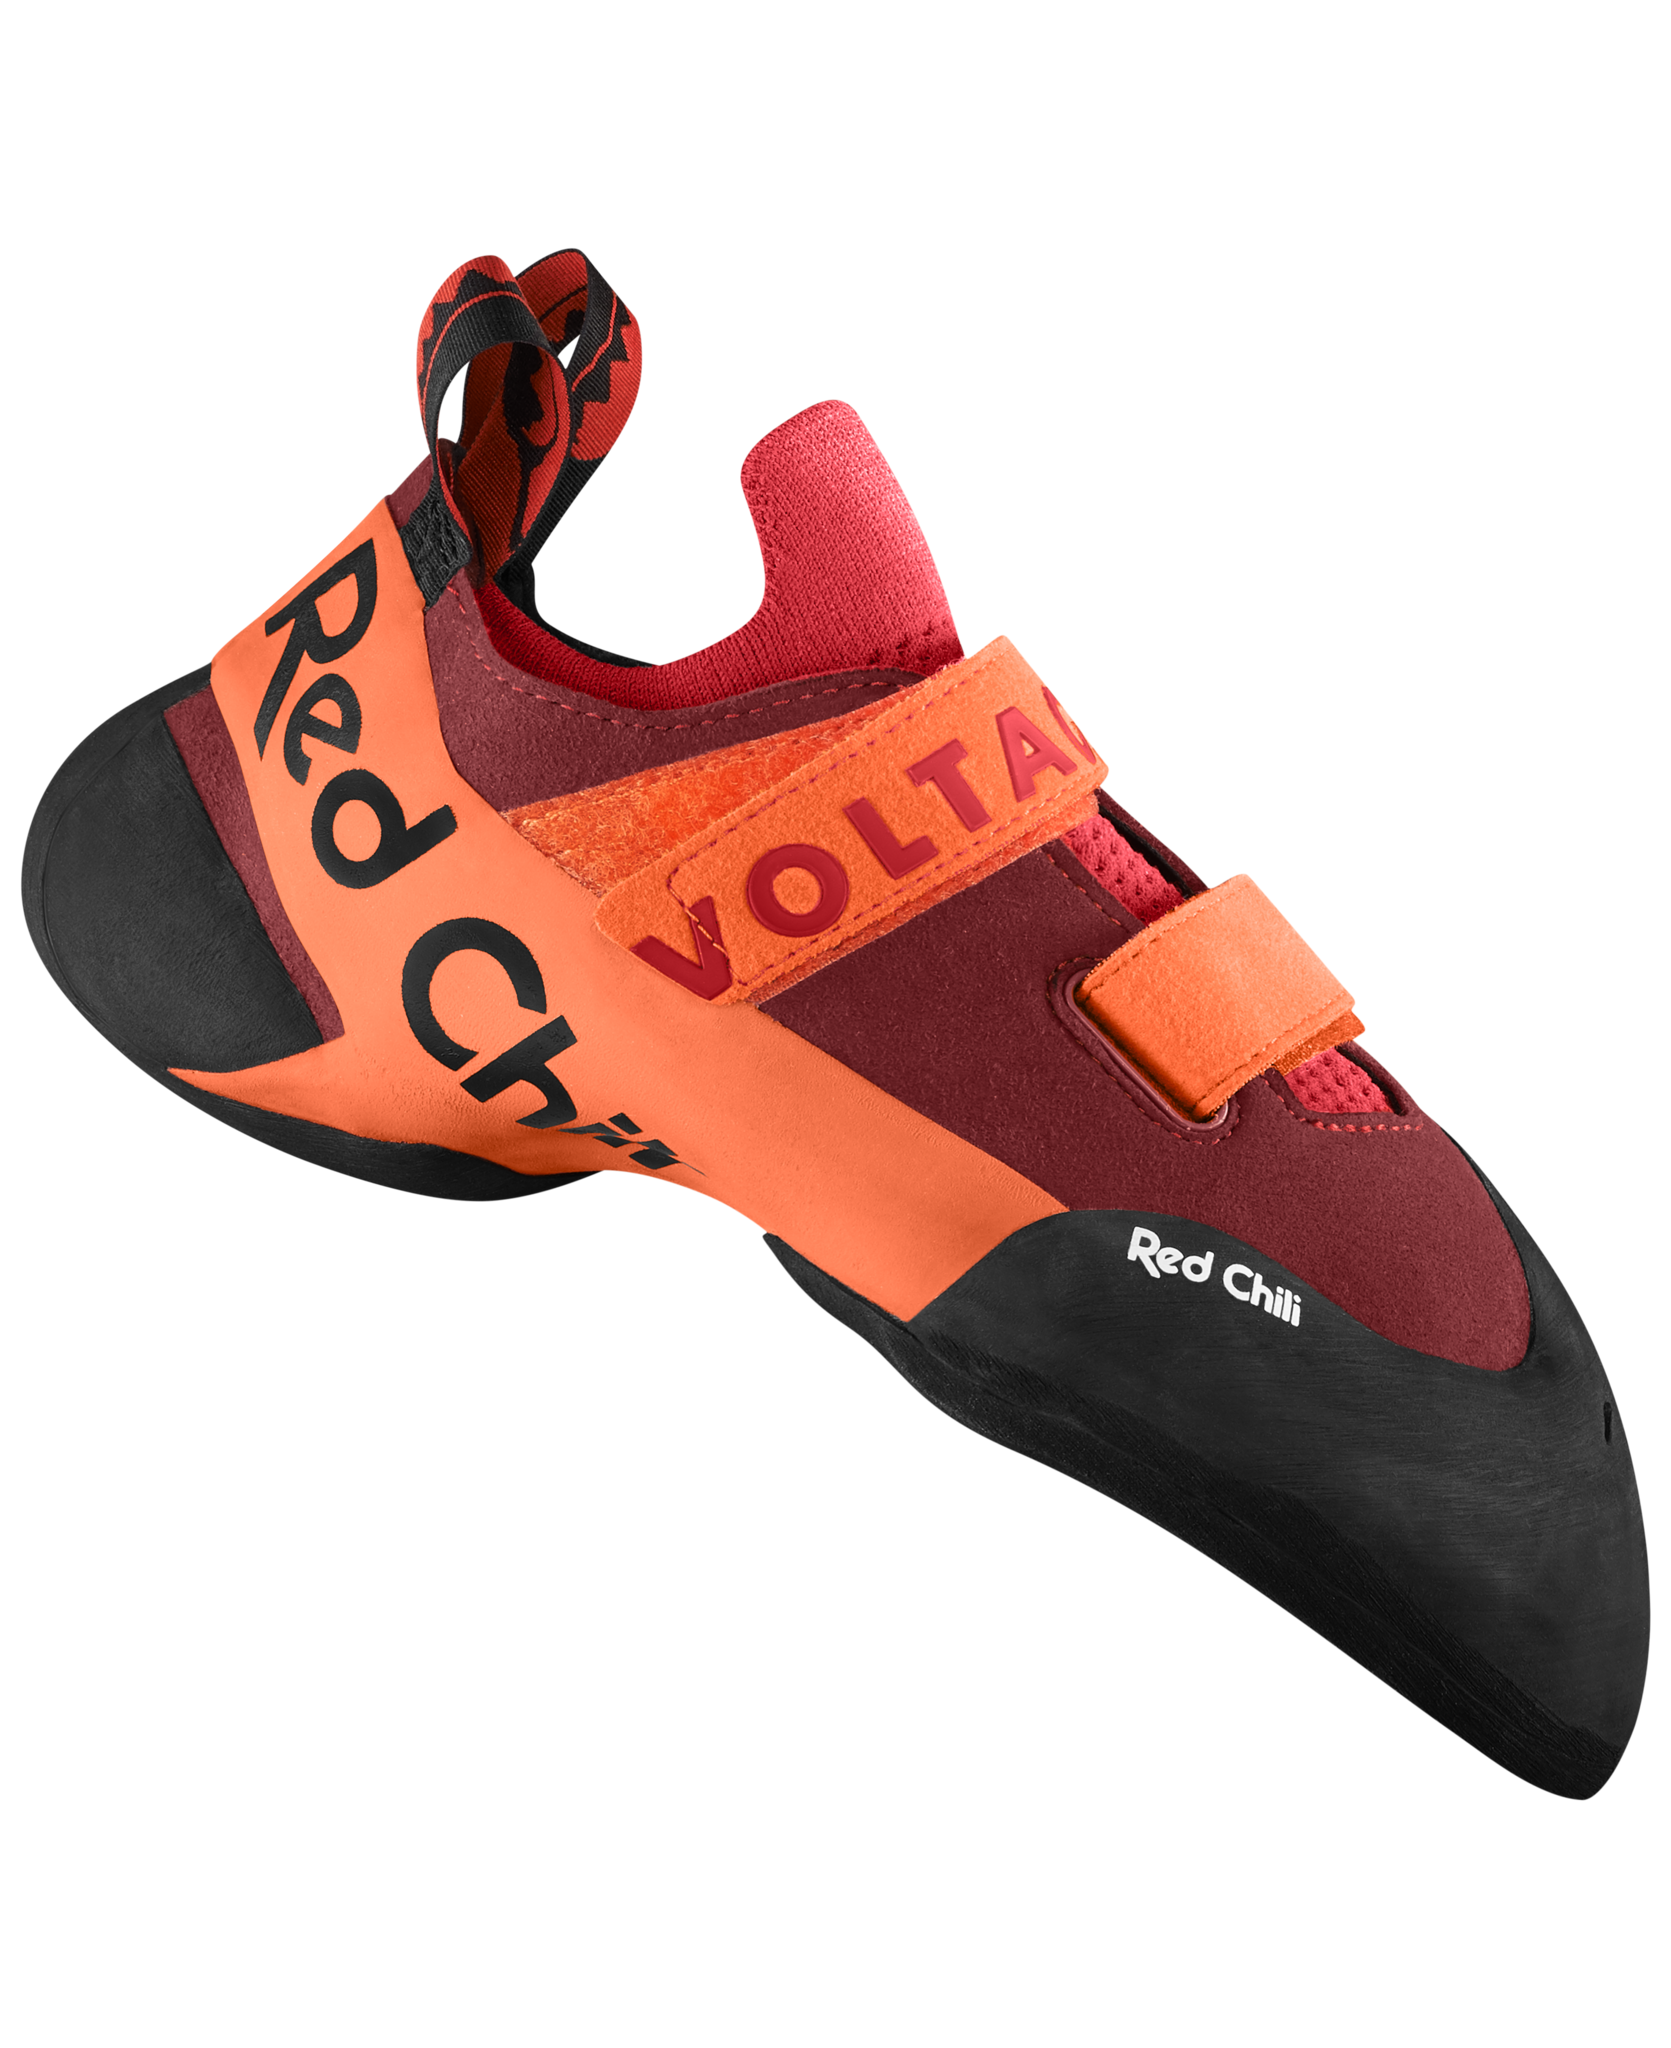 Red Chili - Voltage II Climbing Shoe